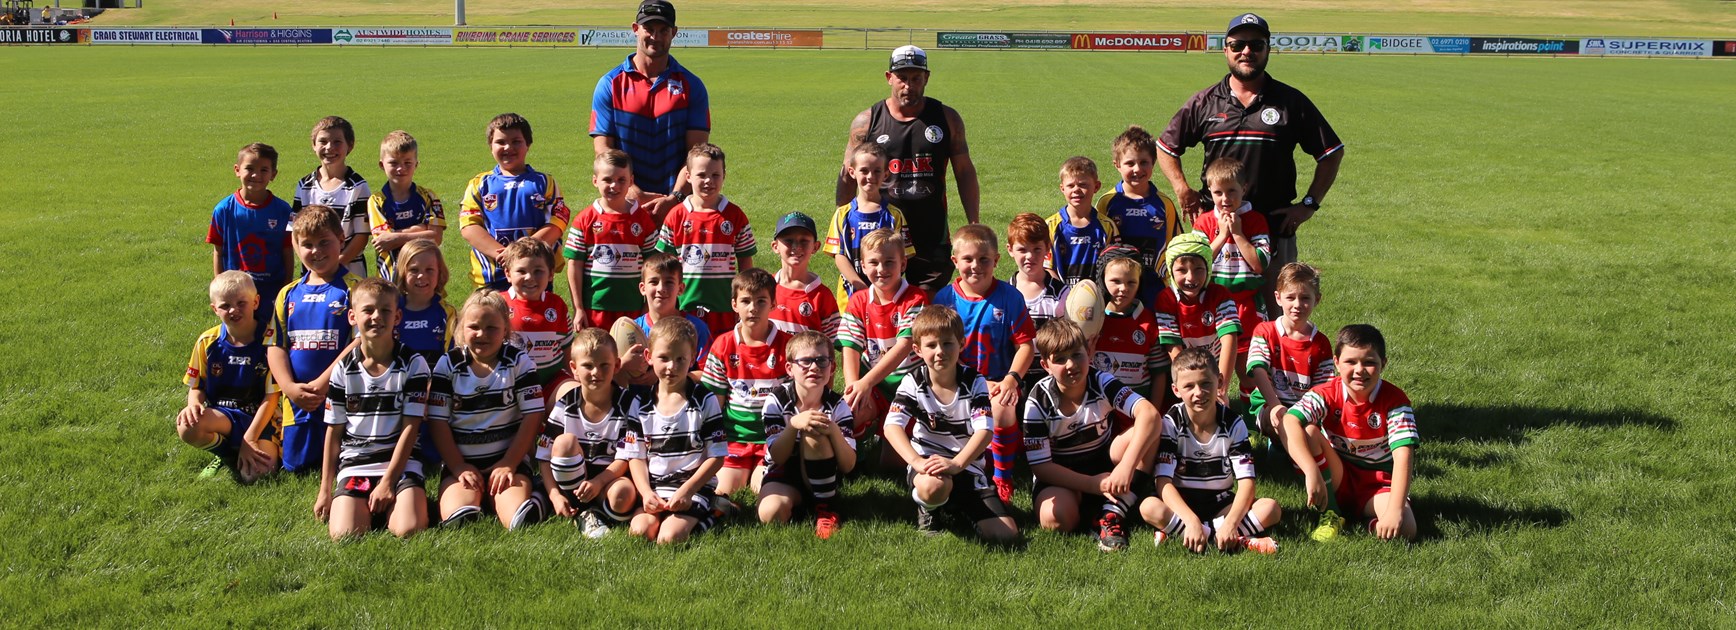 Tickets selling fast as Local Juniors prepare to take the field in Wagga Wagga